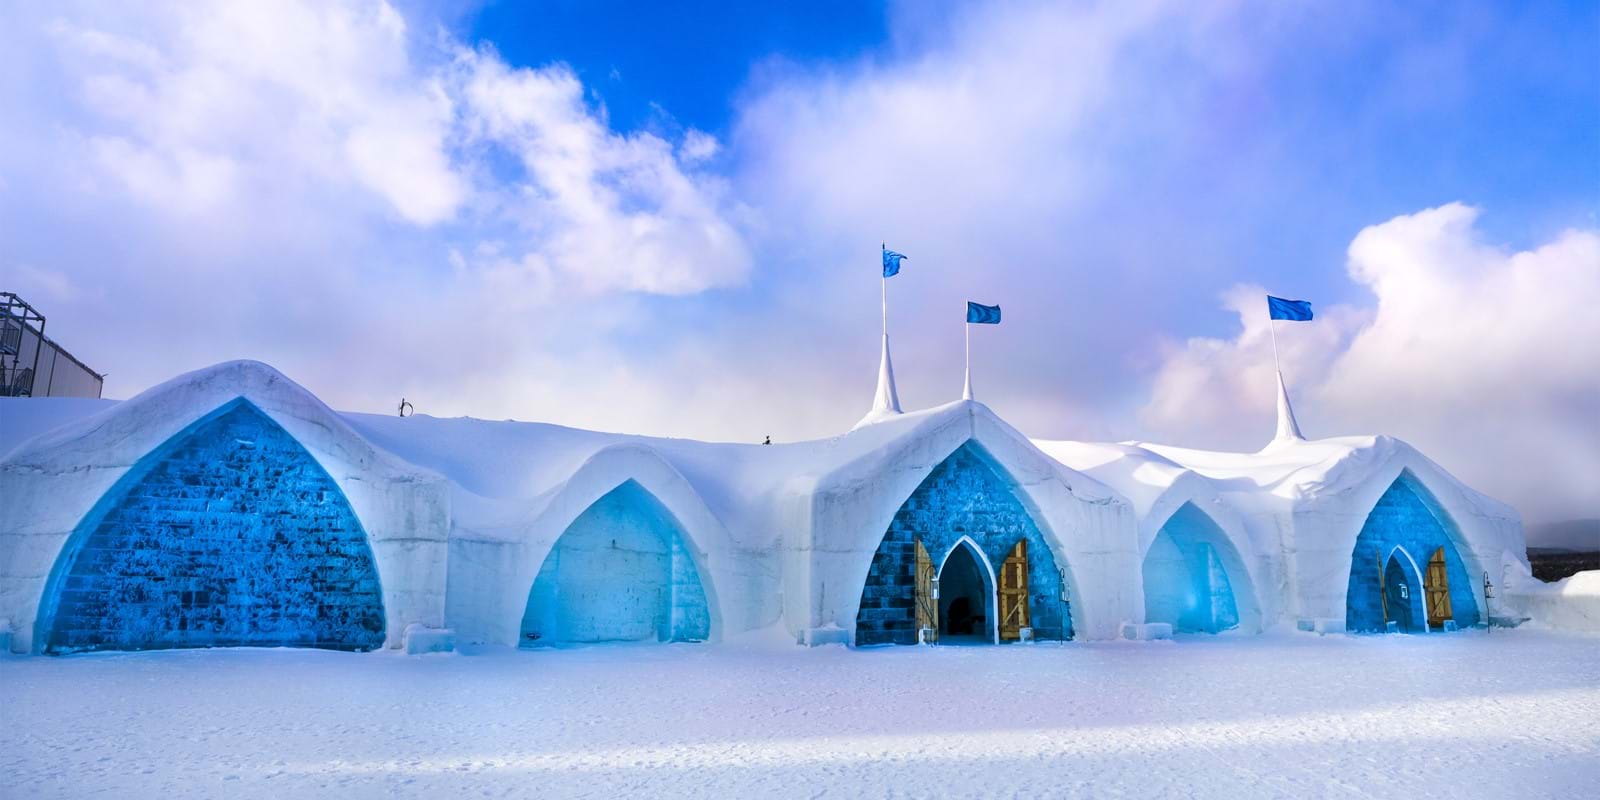 Our Ice Hotel